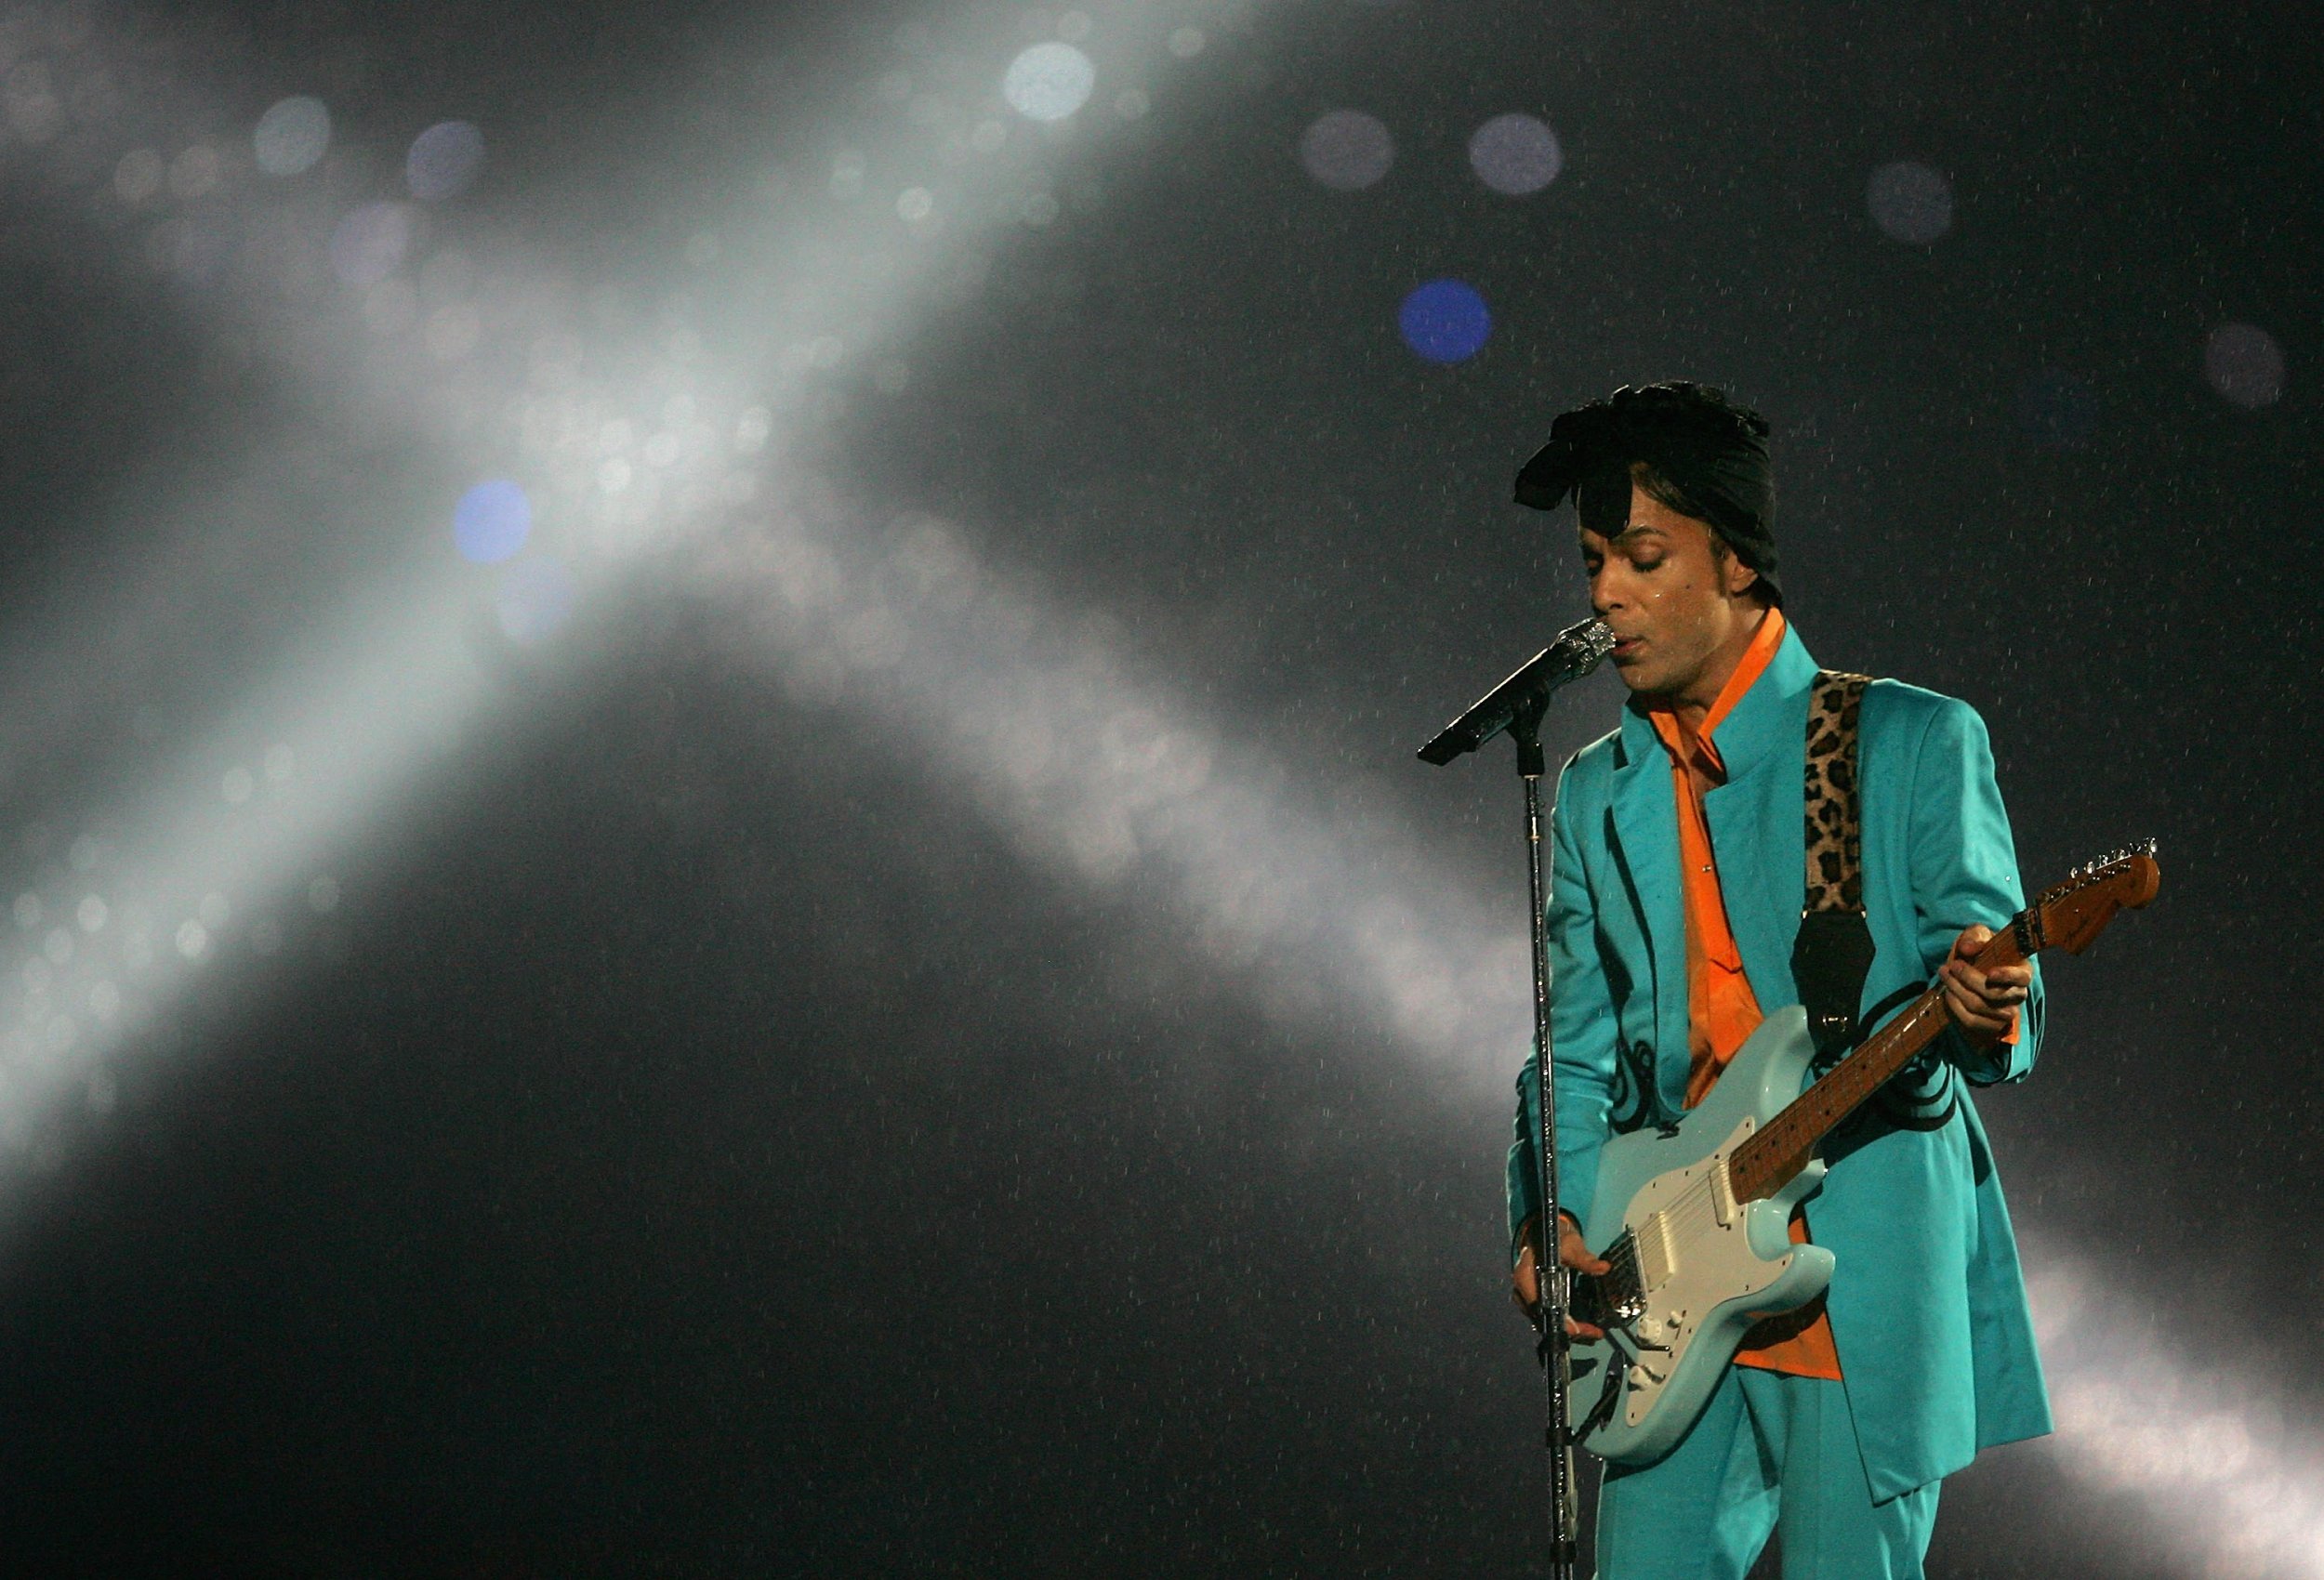 Prince, the singer who has died aged 57.